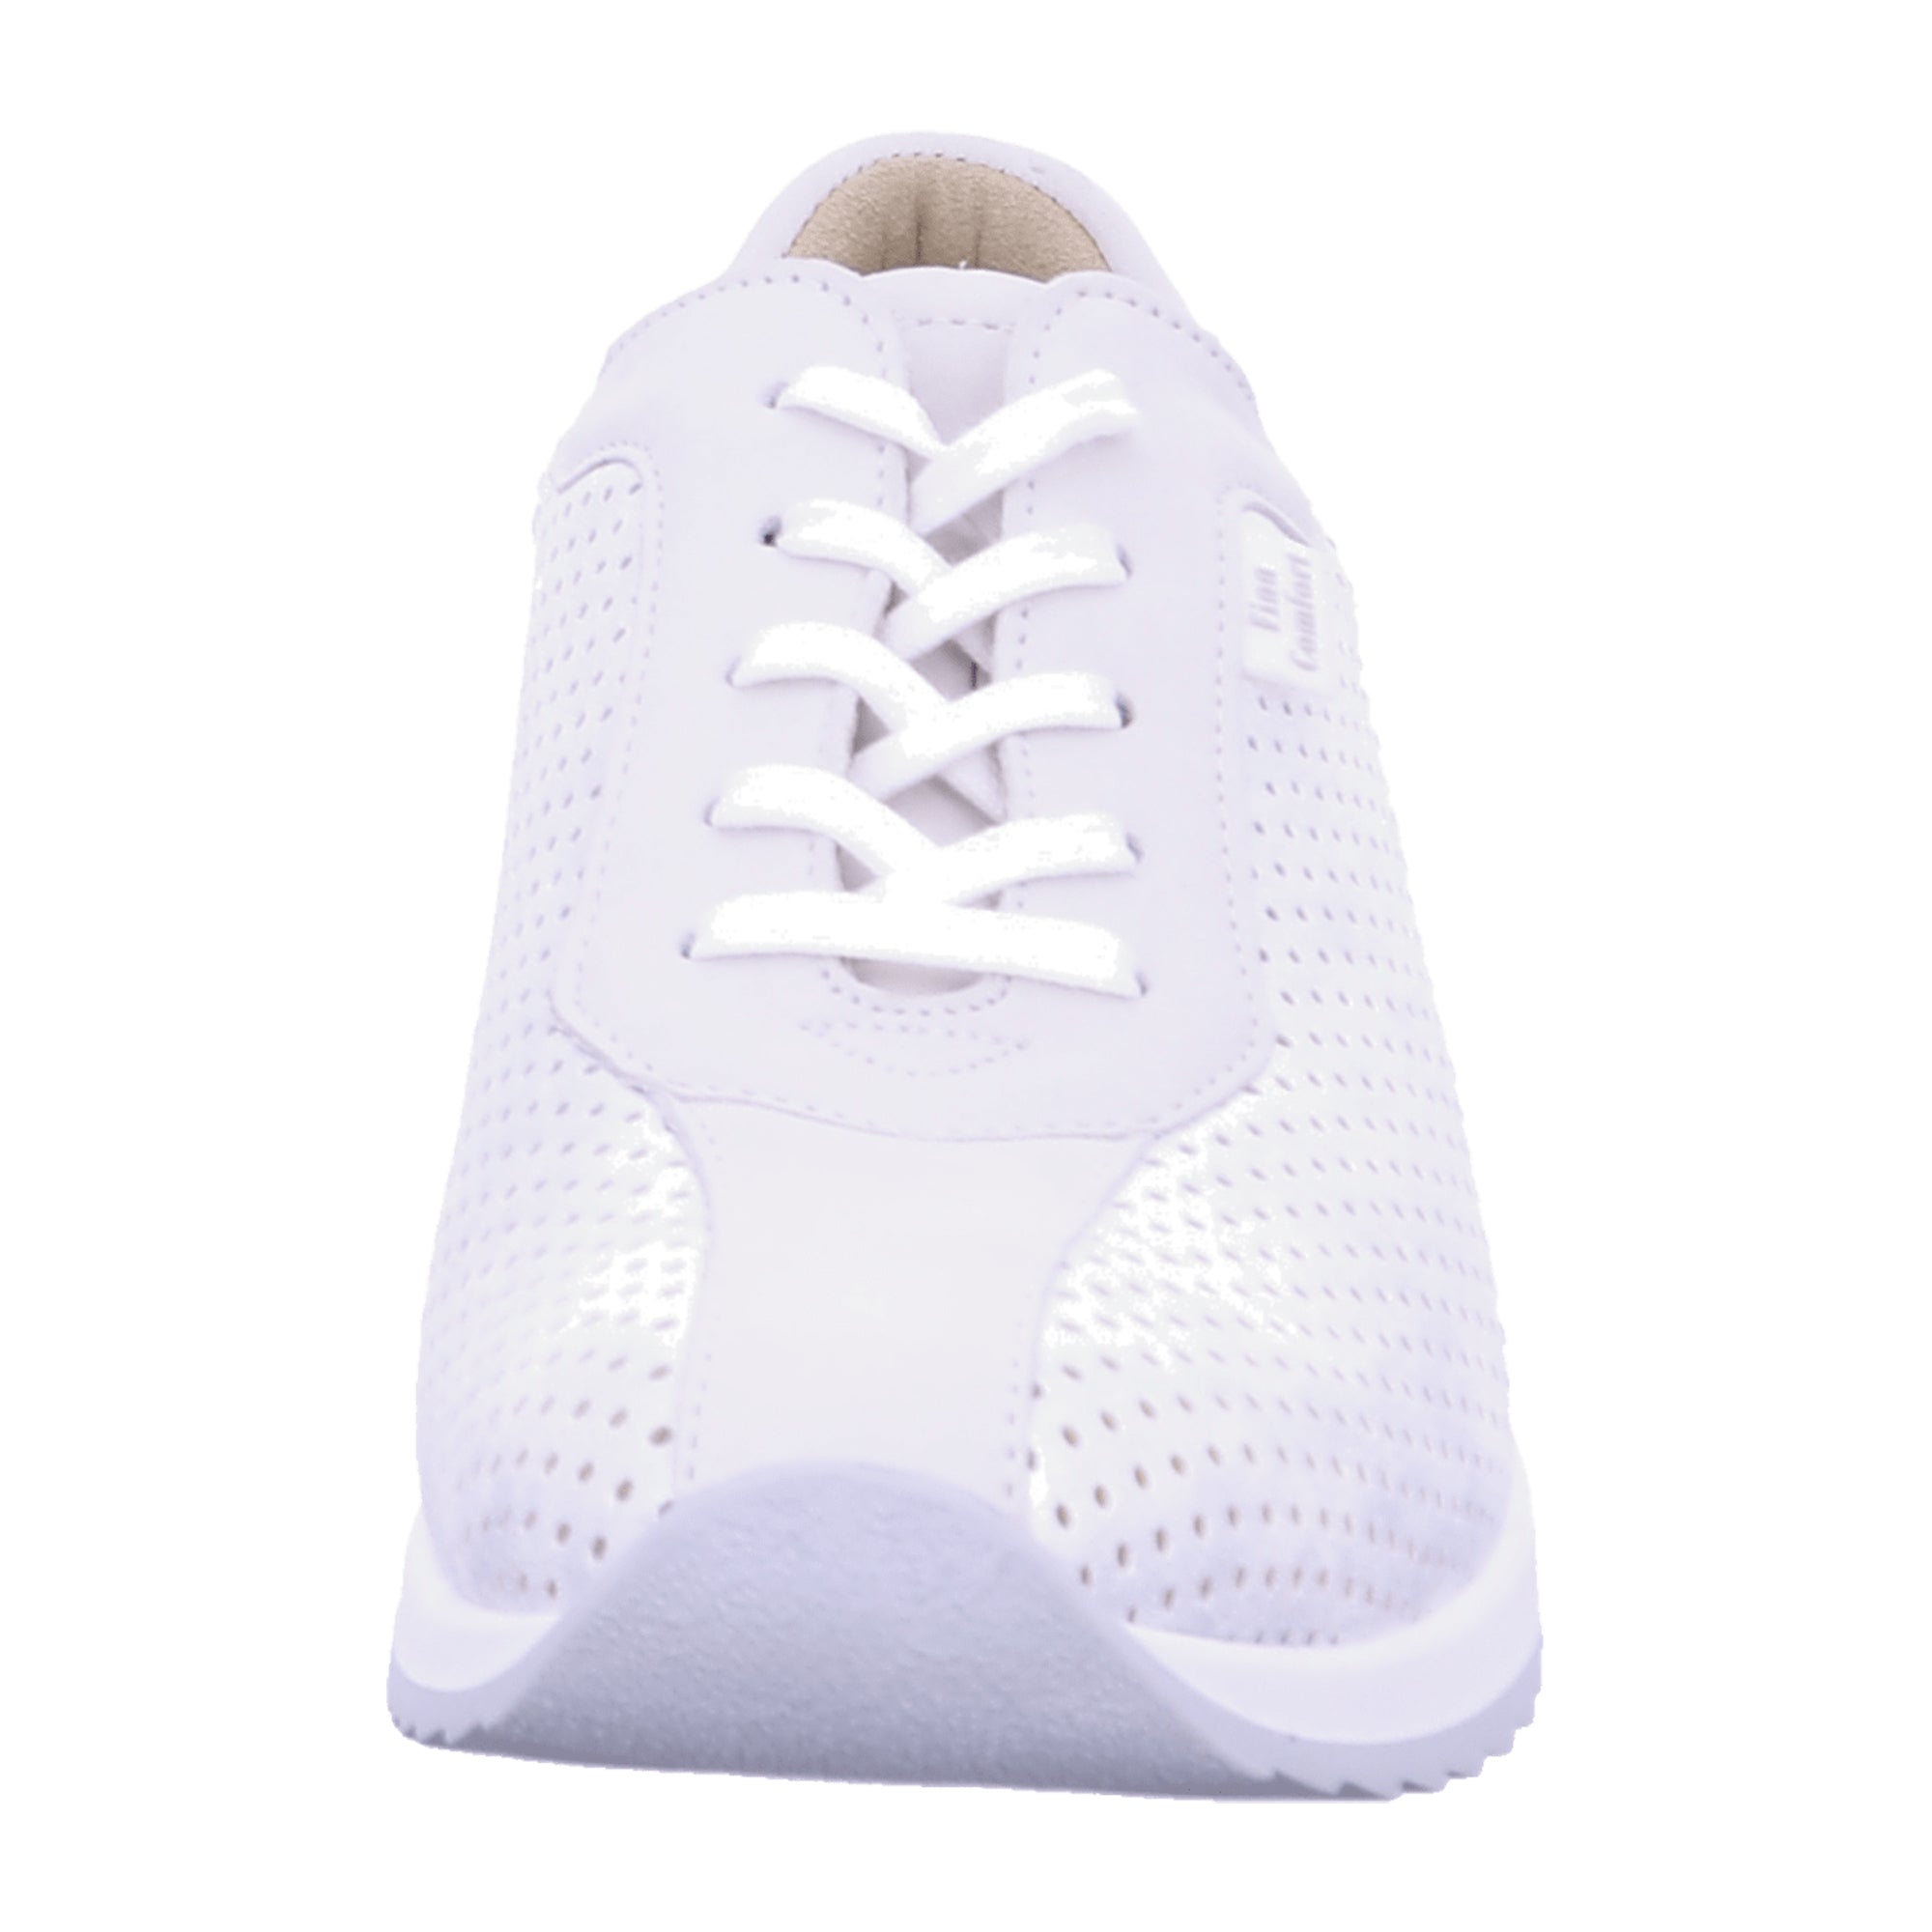 Finn Comfort Melk Women's Comfortable White Shoes - Stylish and Durable